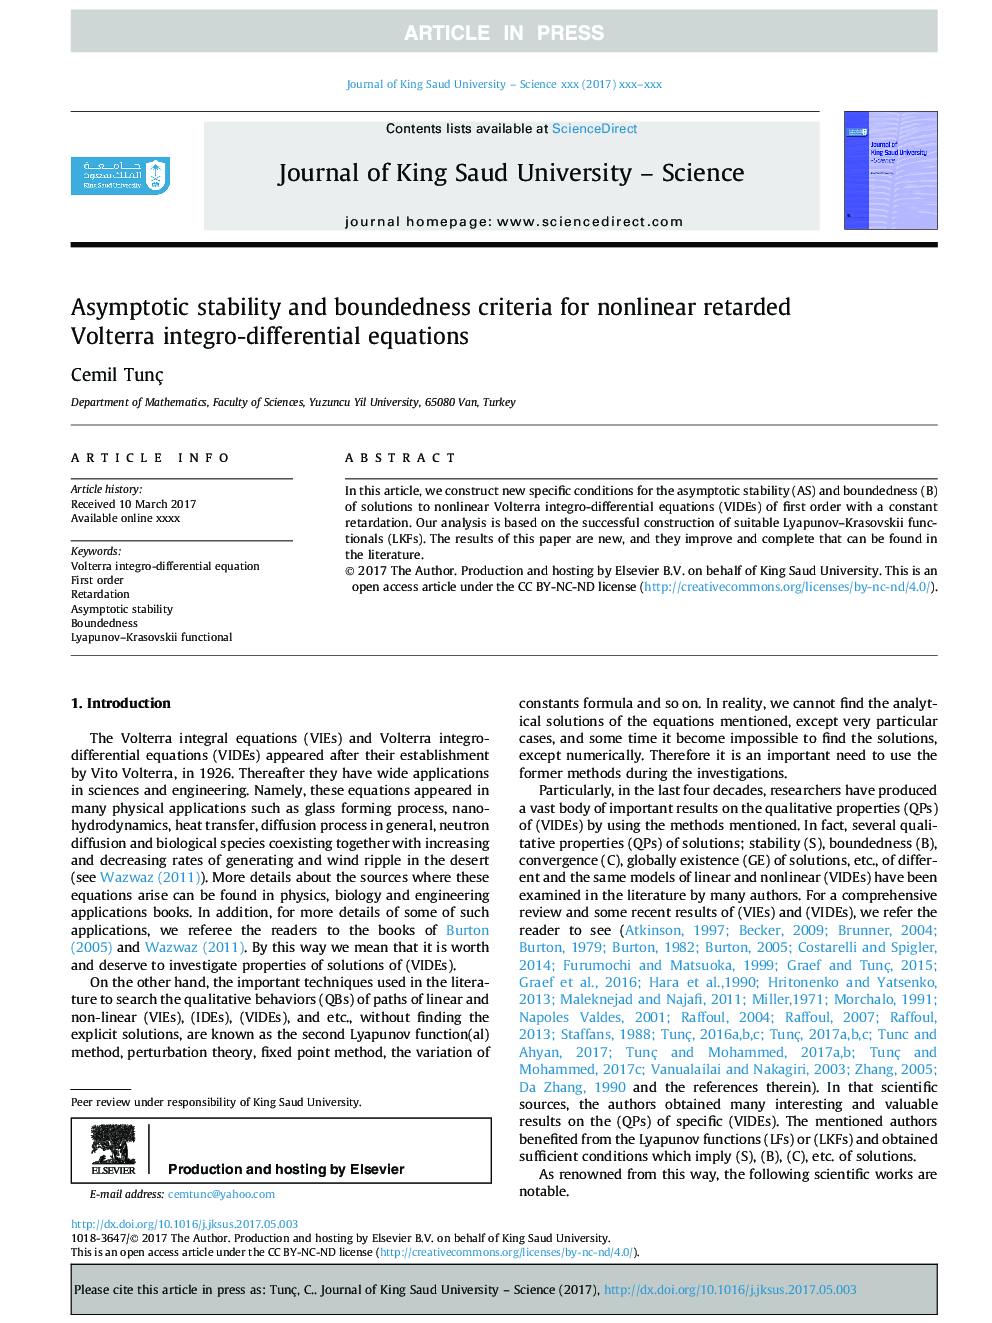 Asymptotic stability and boundedness criteria for nonlinear retarded Volterra integro-differential equations